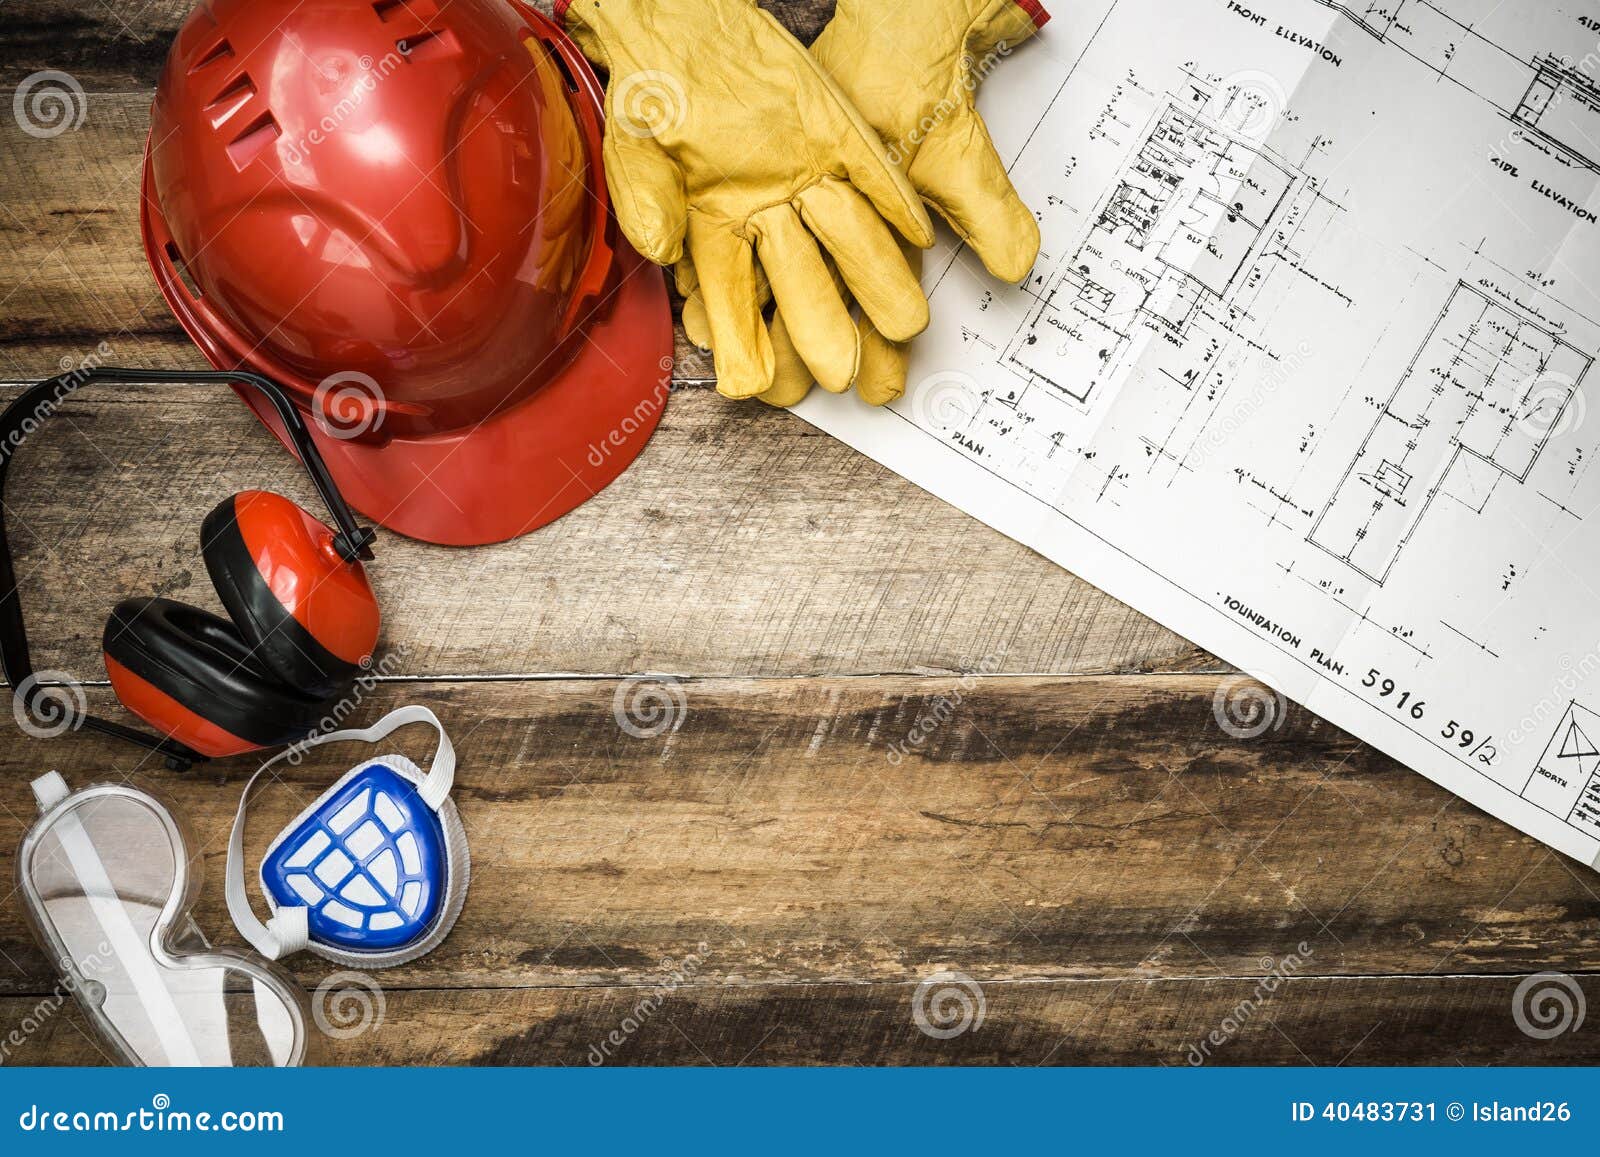 construction protective workwear with plans